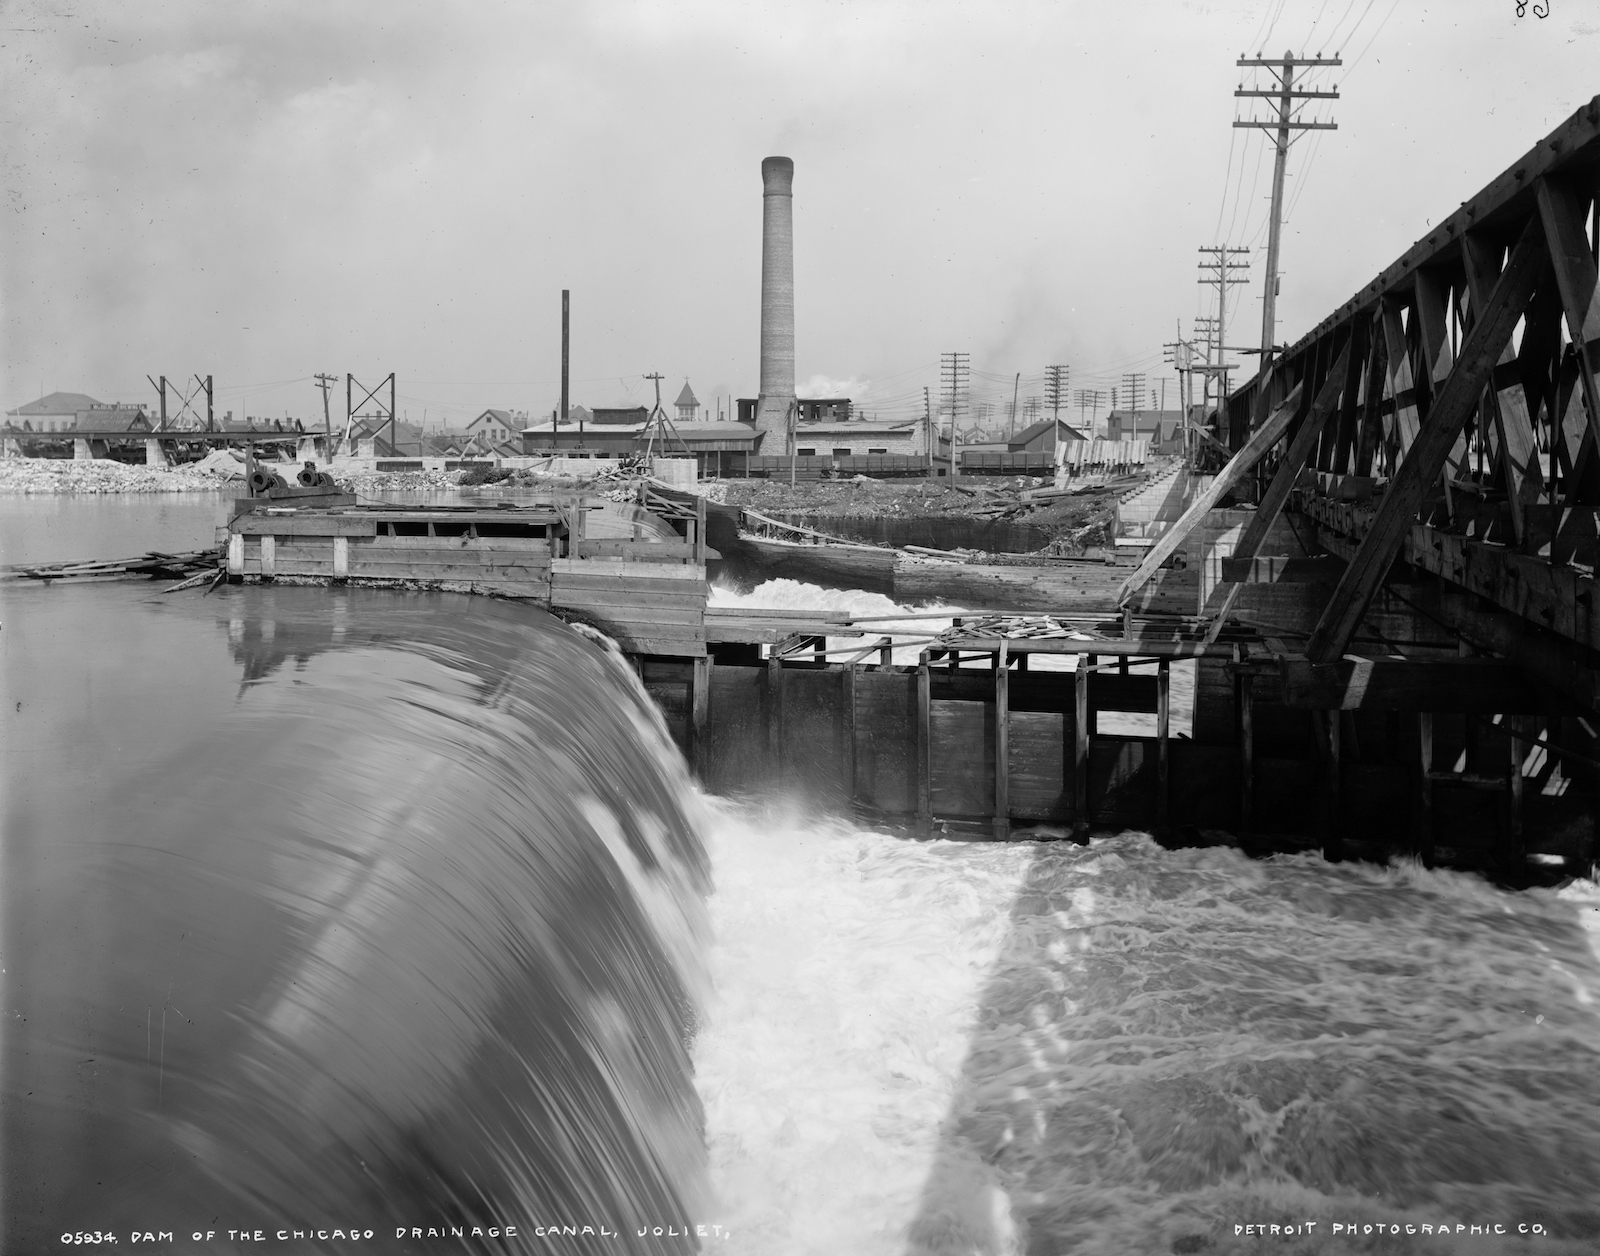 a black and white photo of a dam with a lot of water pouring from one level to another. In the background, a tall smokestack and industrial infrastructure